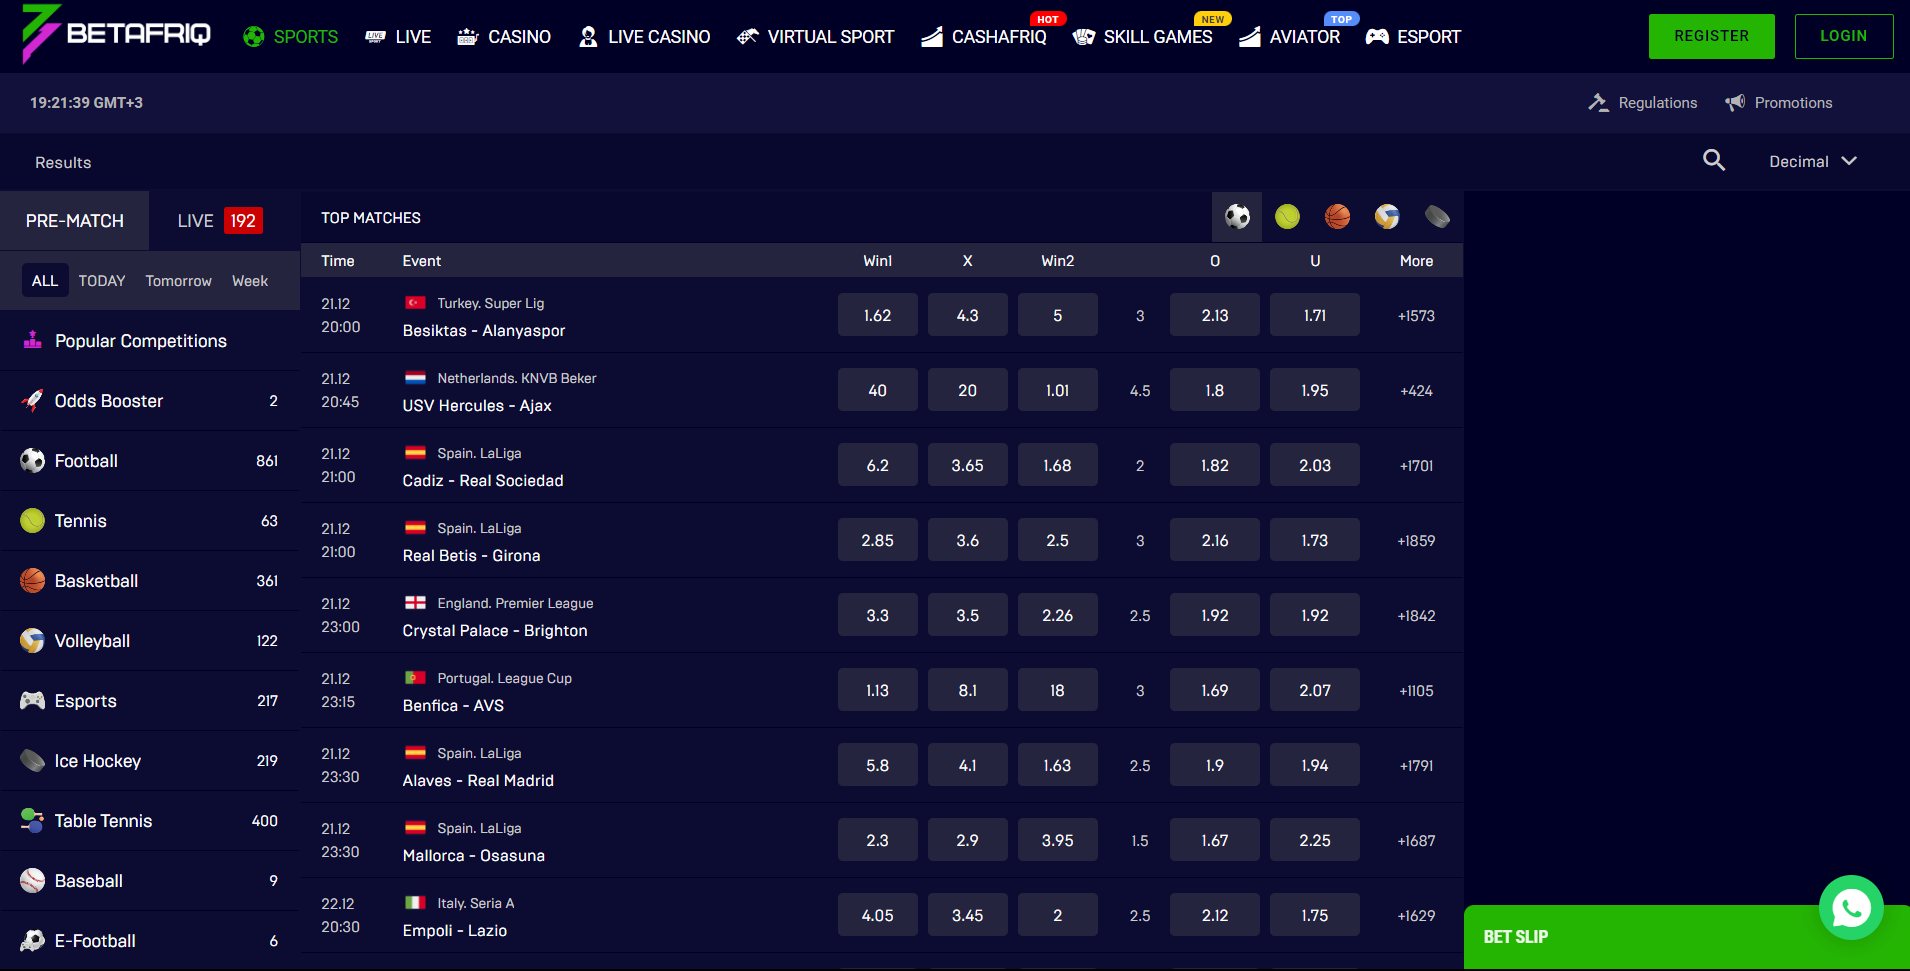 An image showing the BetAfriq Online Sports Betting